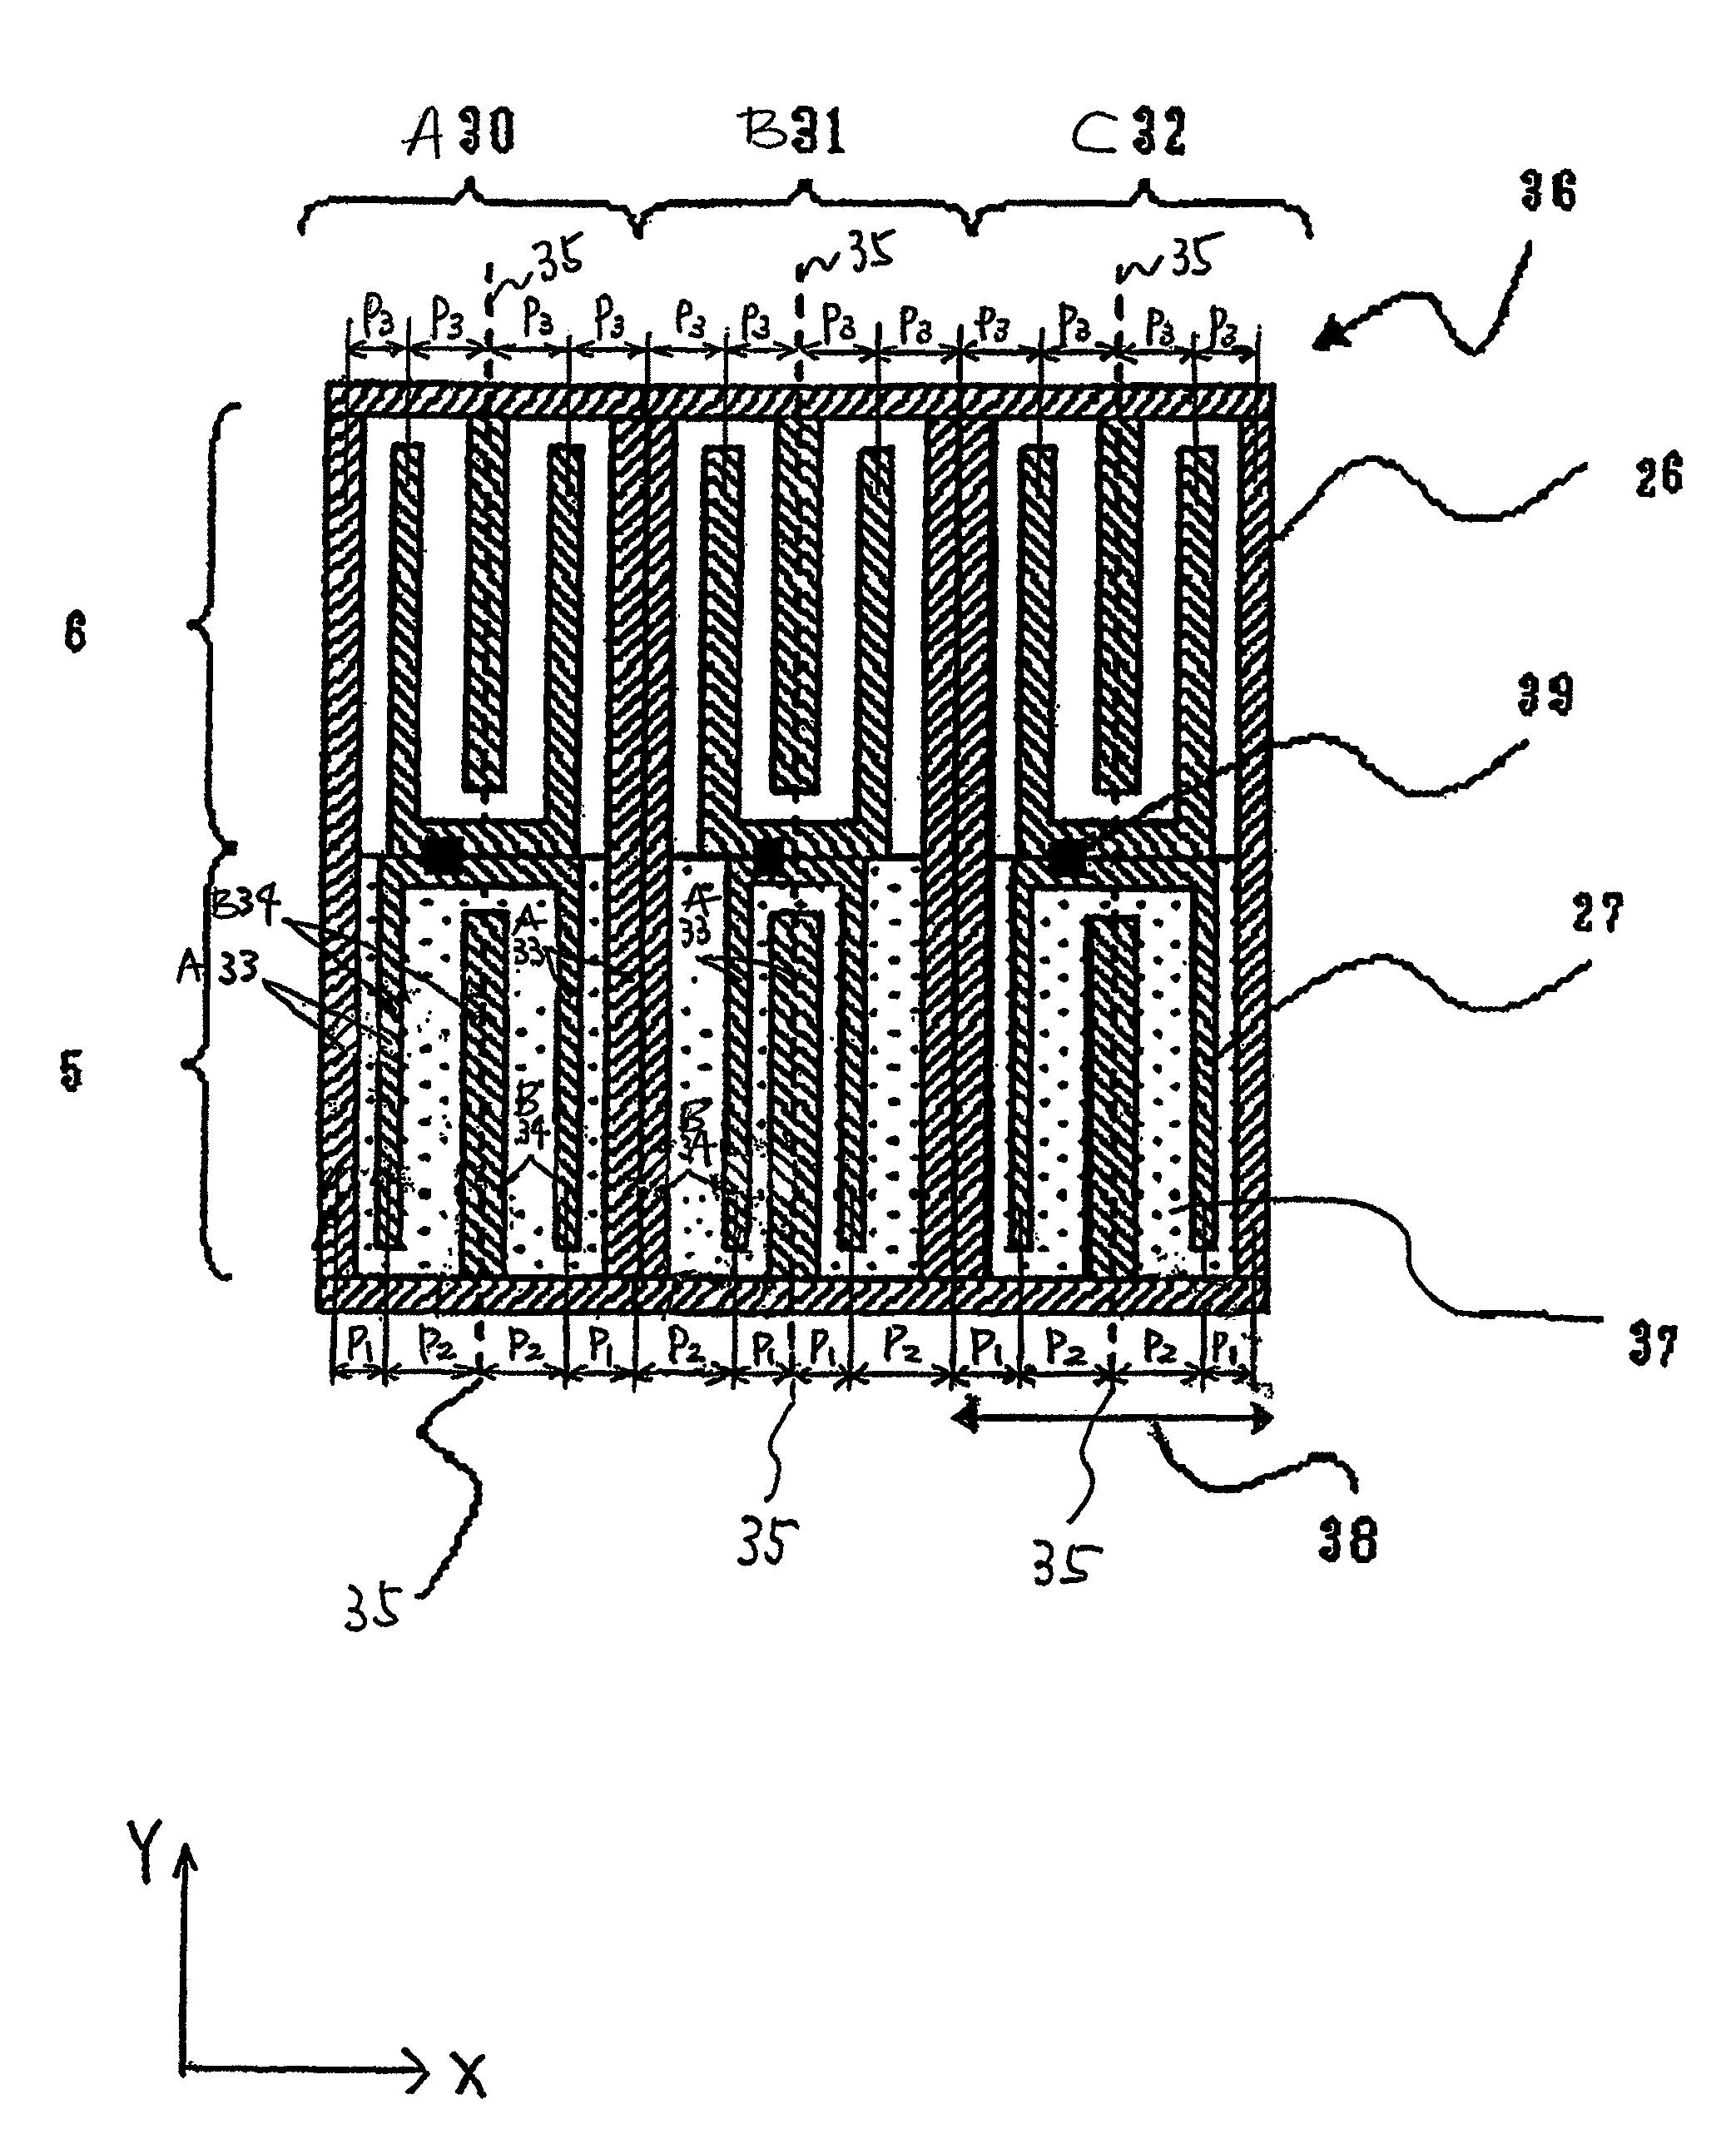 Liquid crystal display device comprising periodically changed permutations of at least two types of electrode-pattern pairs